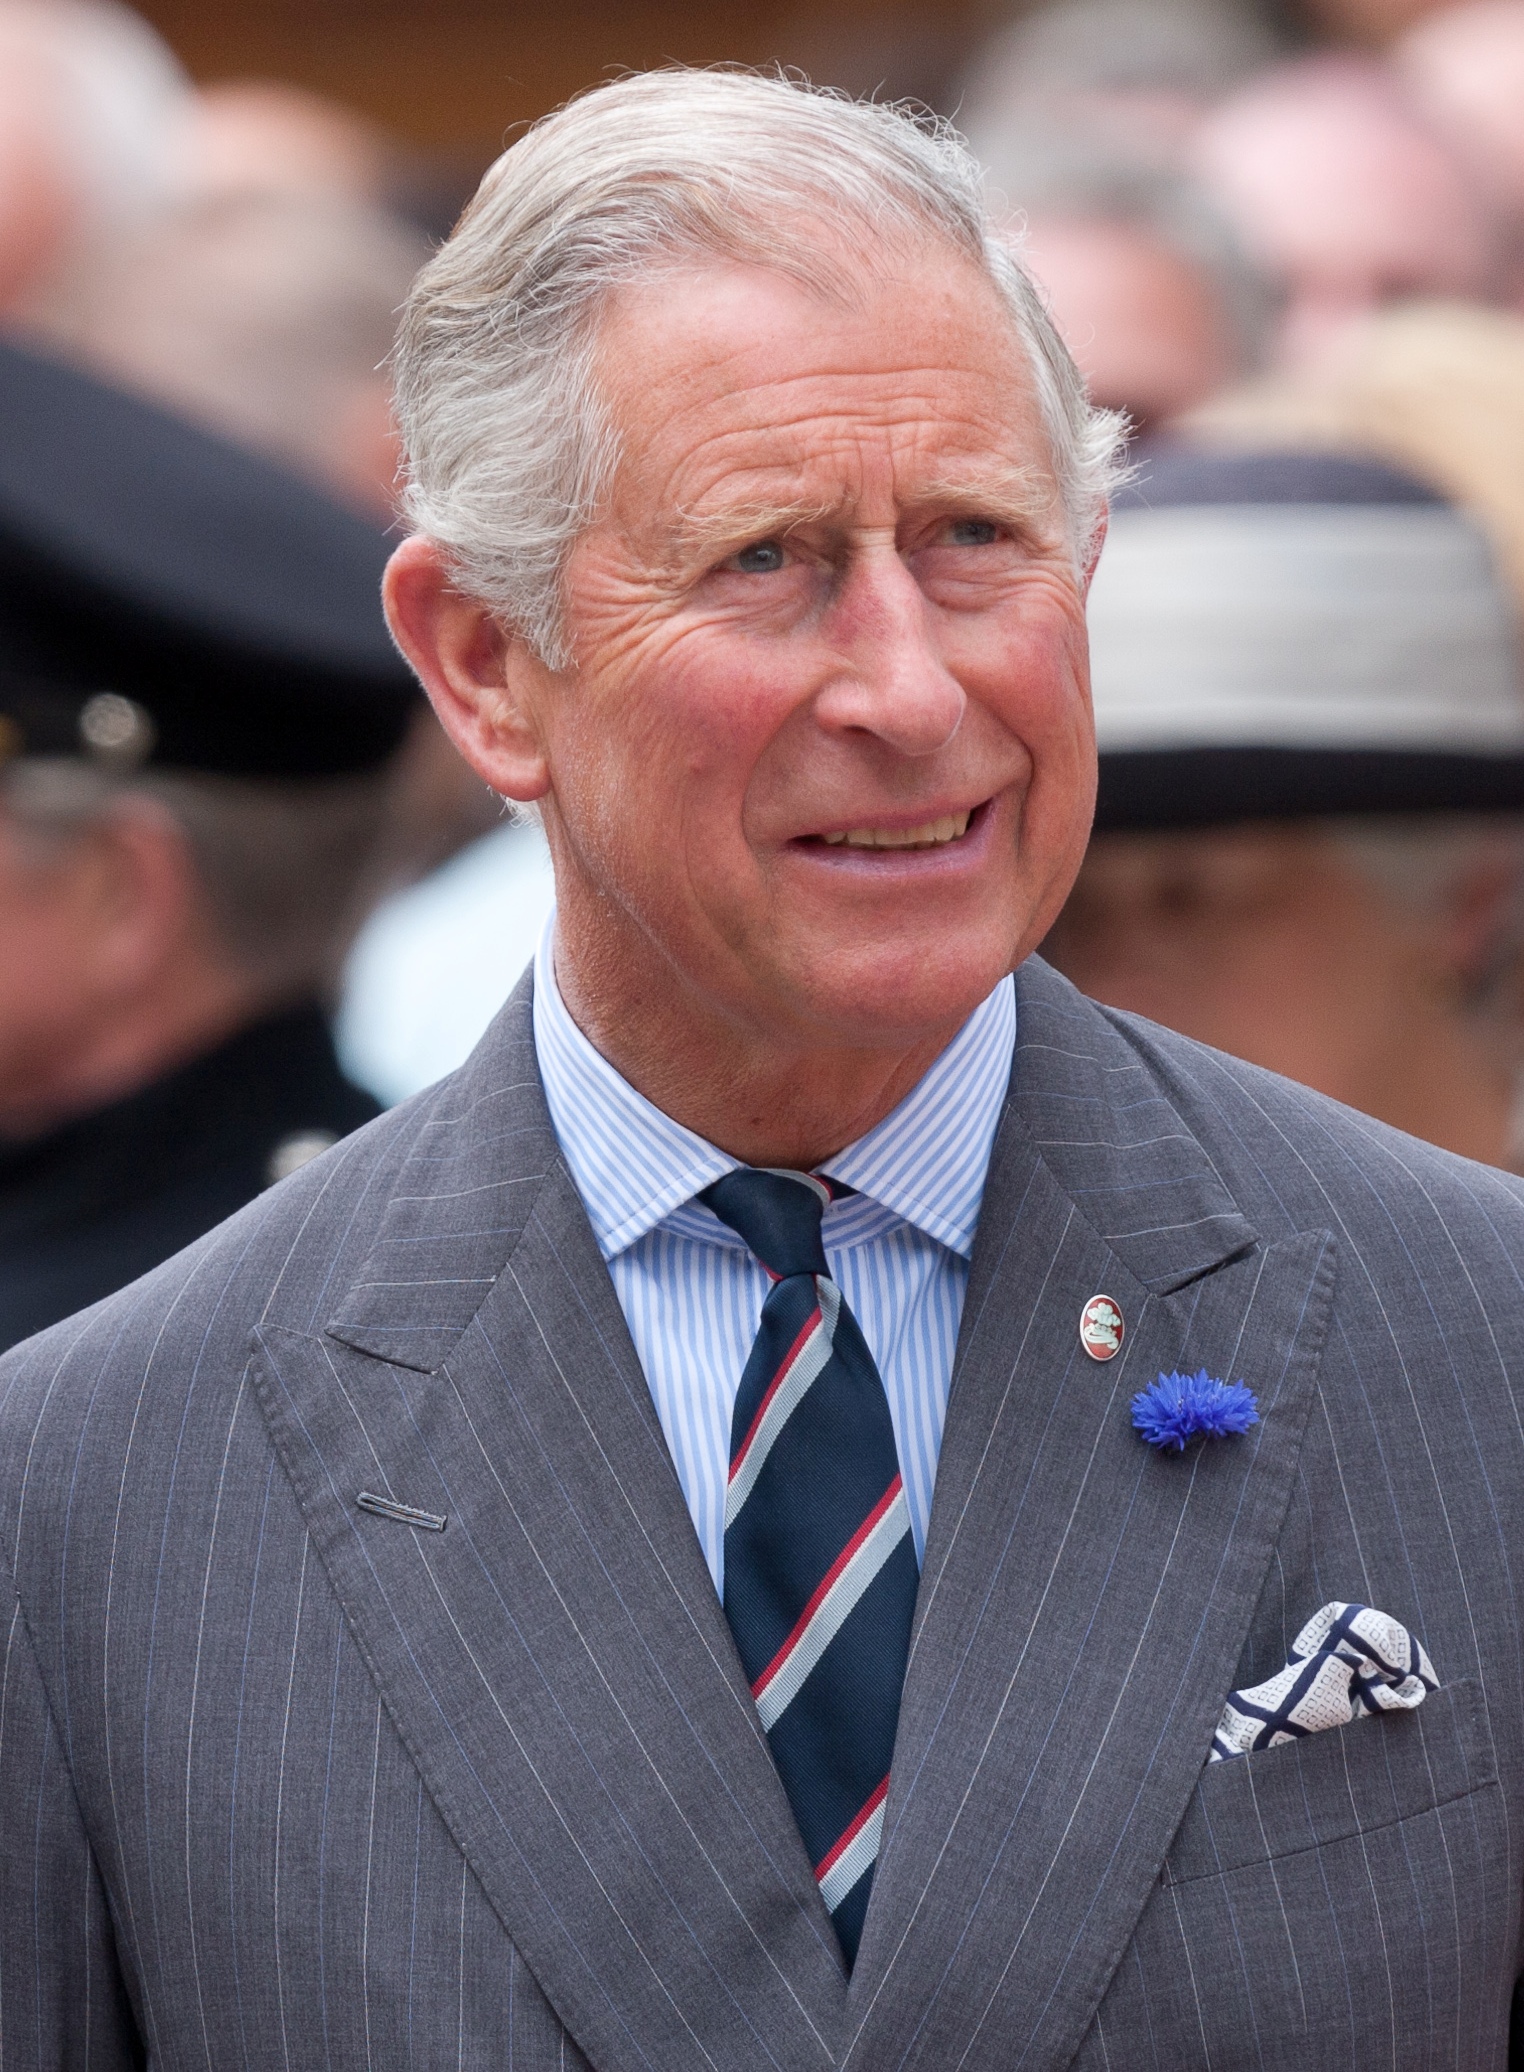 Prince Charles en-route to Caribbean tour endorse blue economy for sustainable growth